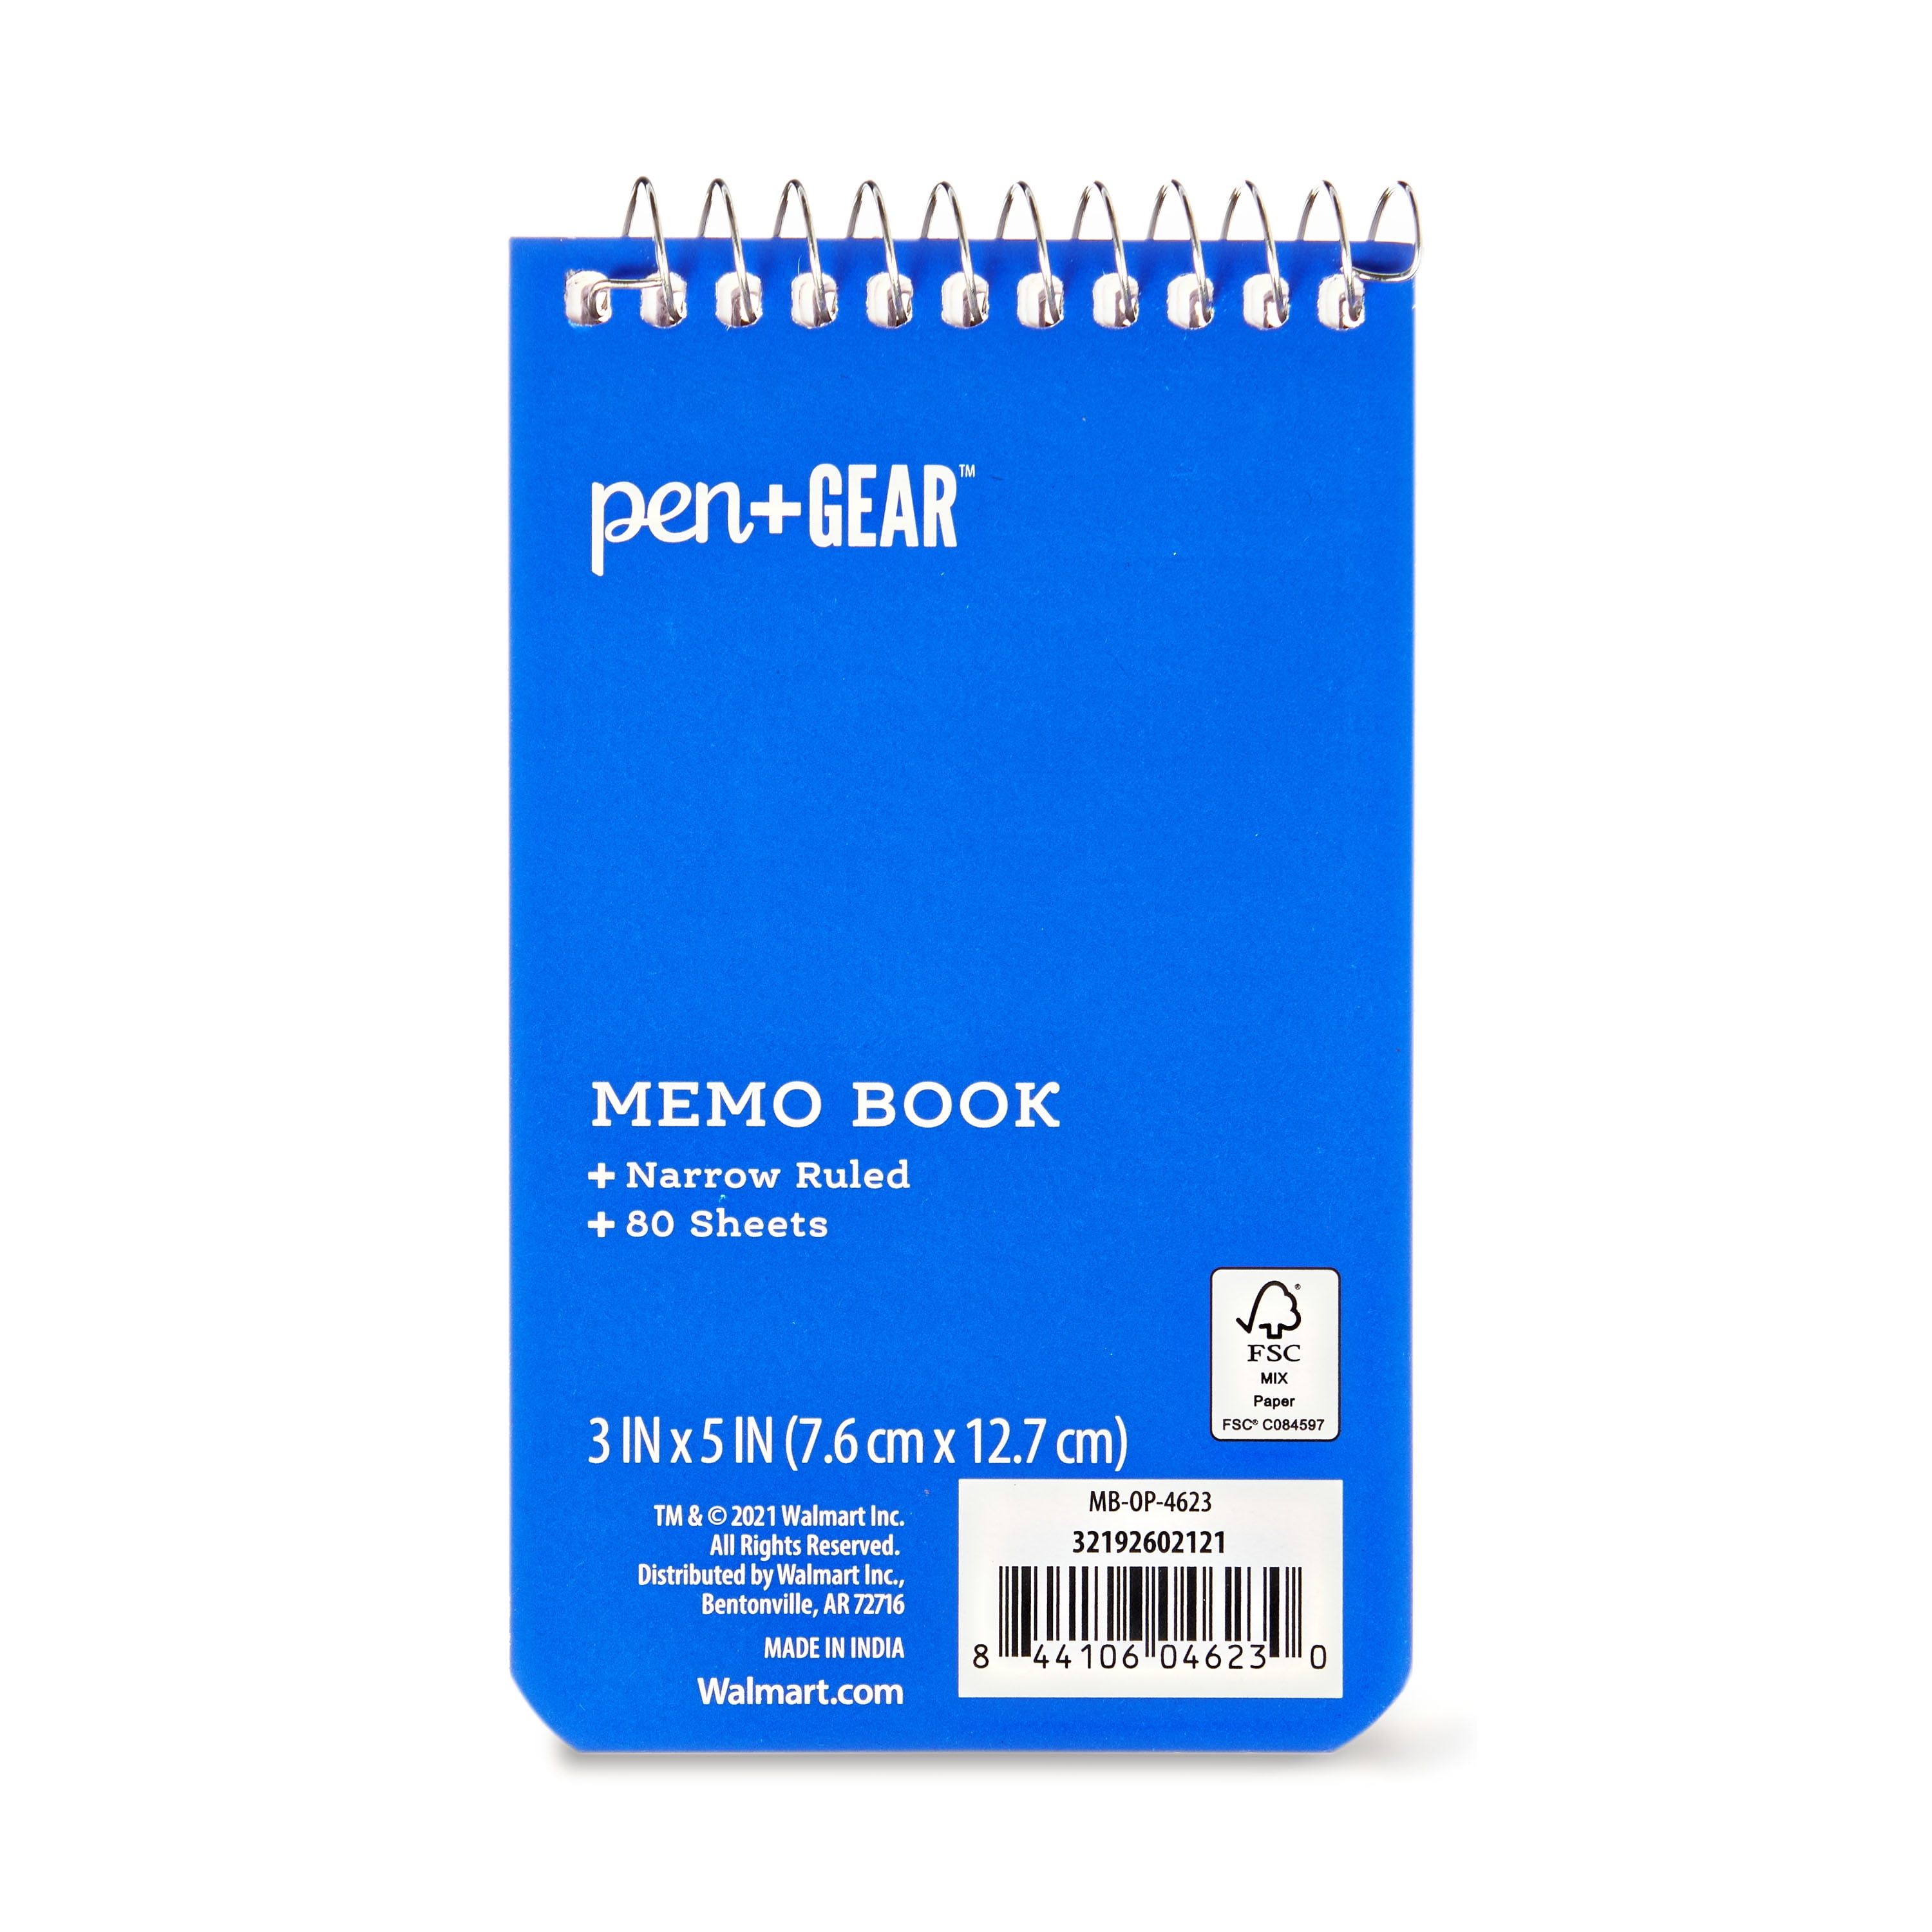 8-Pack Pen+Gear Memo Pads 3" x 5" Narrow Ruled Assorted Colors 80 Sheets 